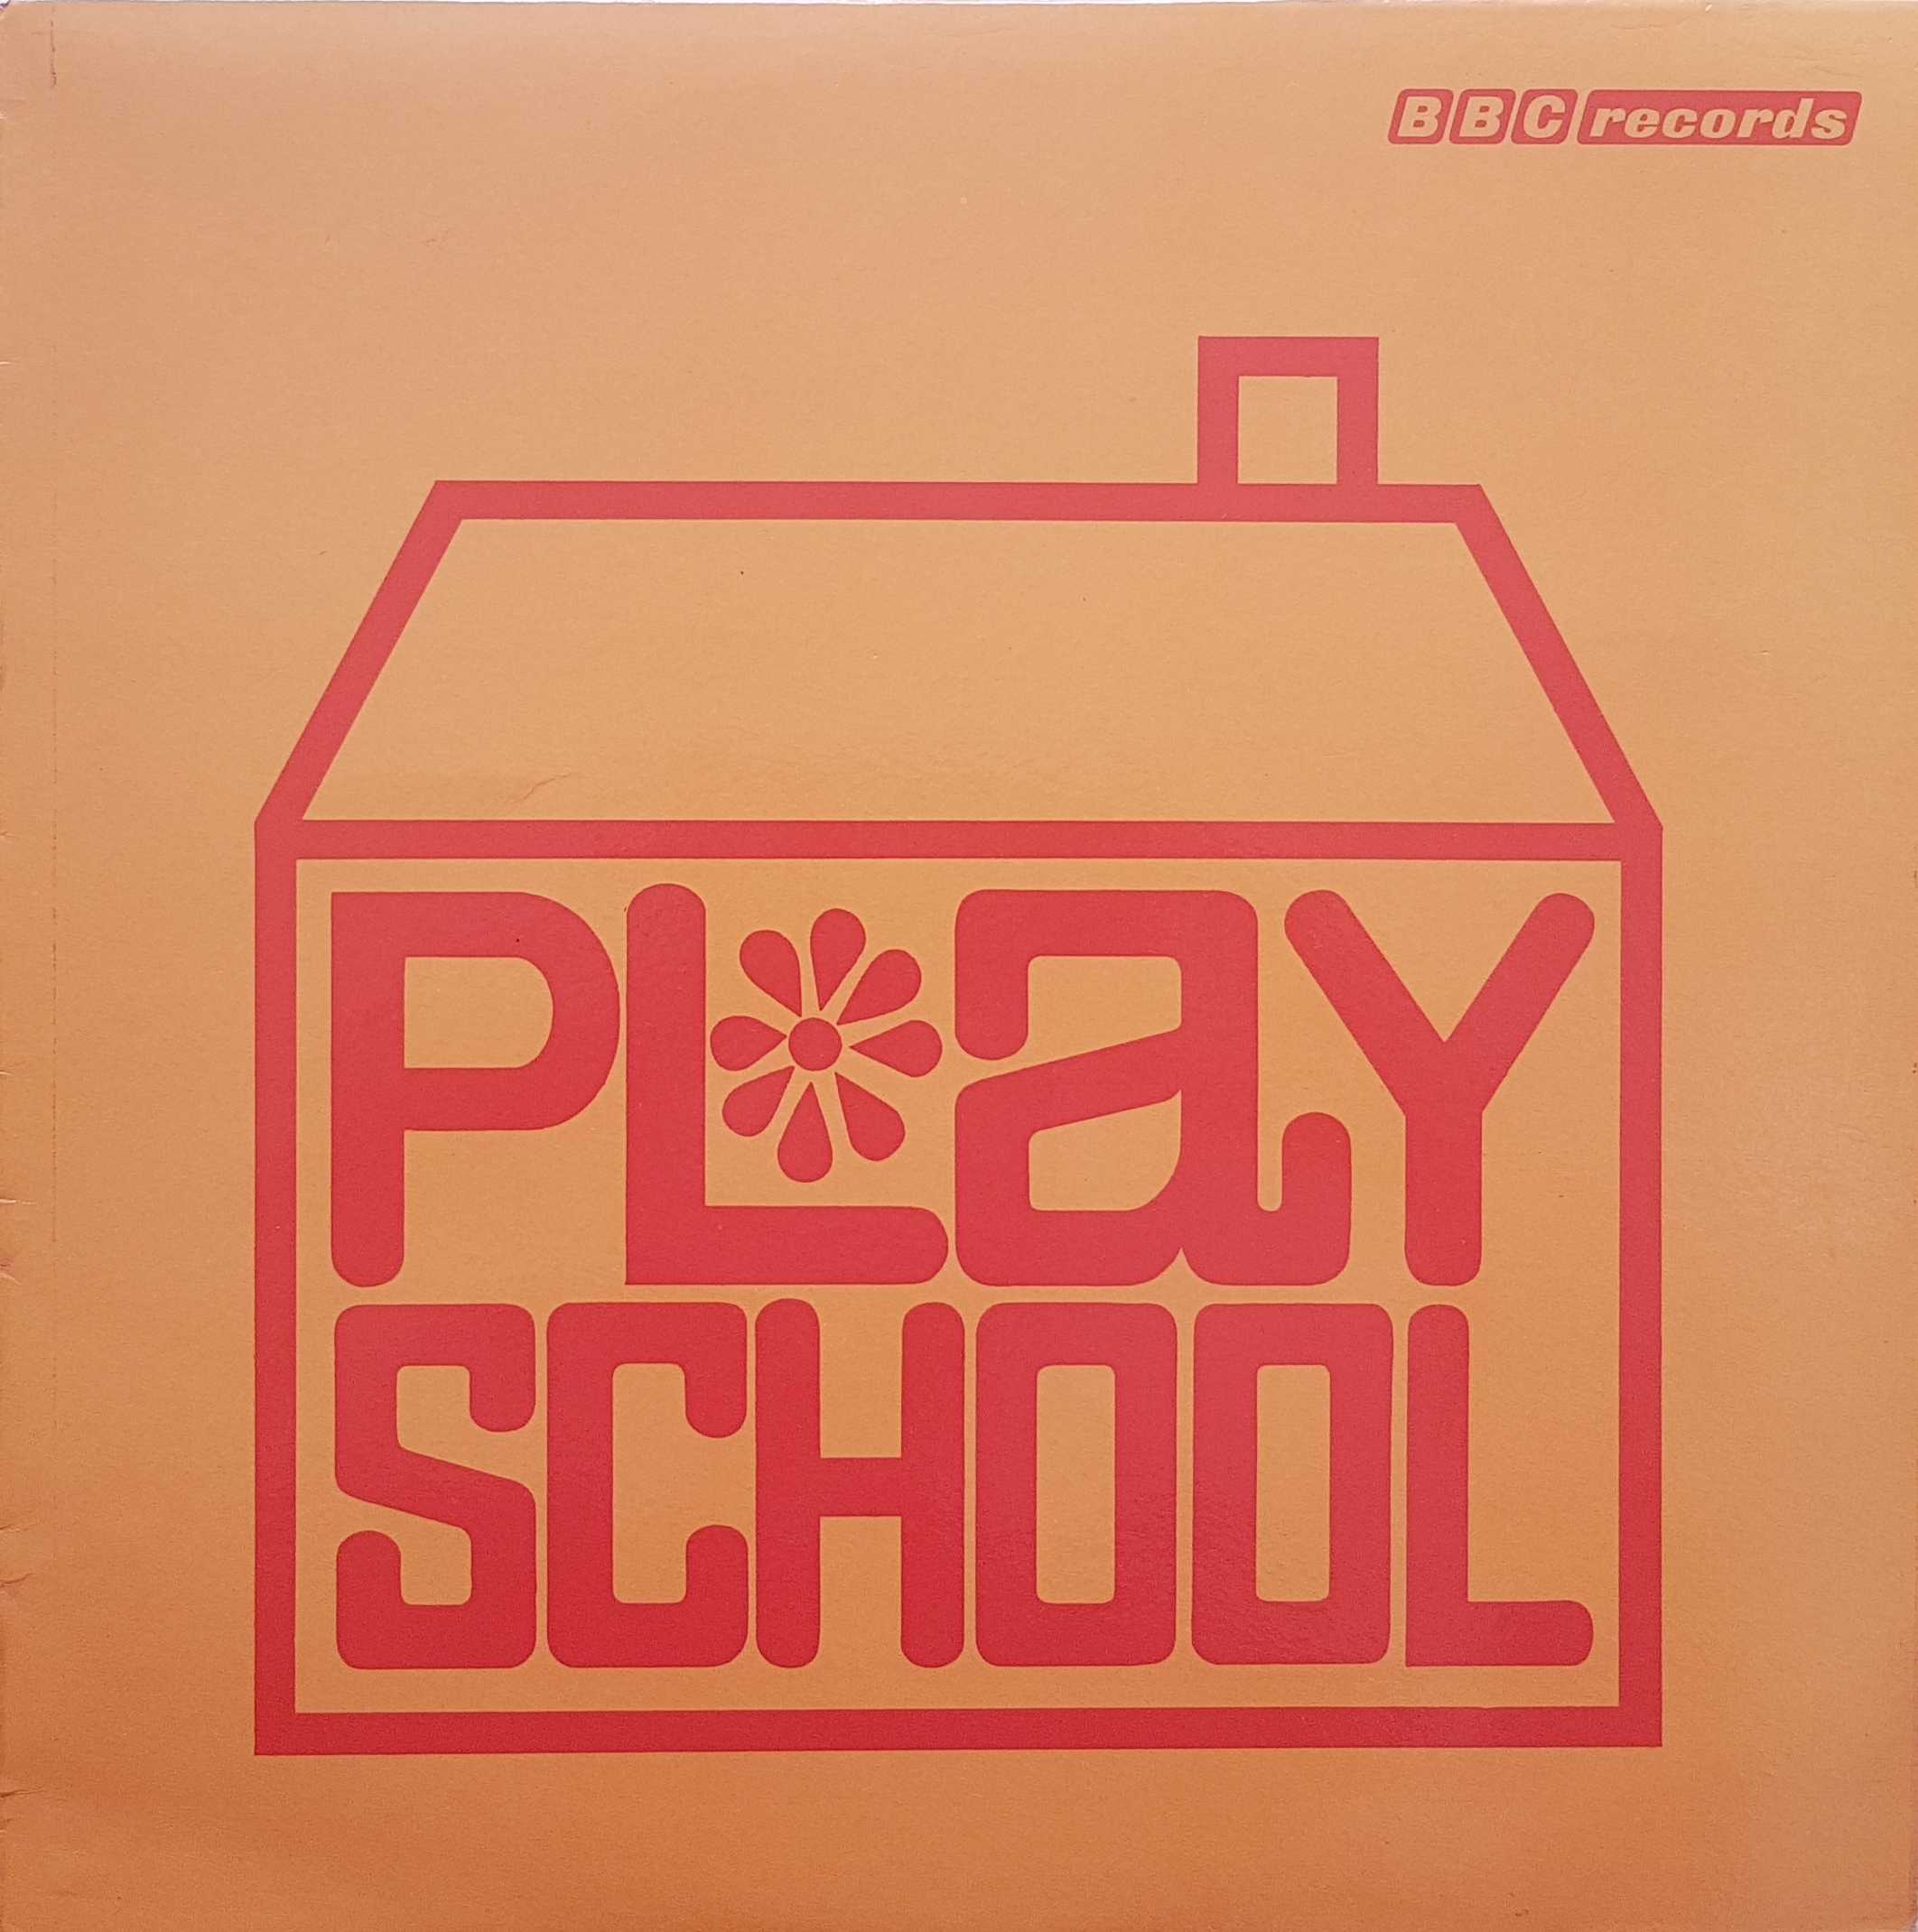 Picture of Playschool by artist Various from the BBC albums - Records and Tapes library